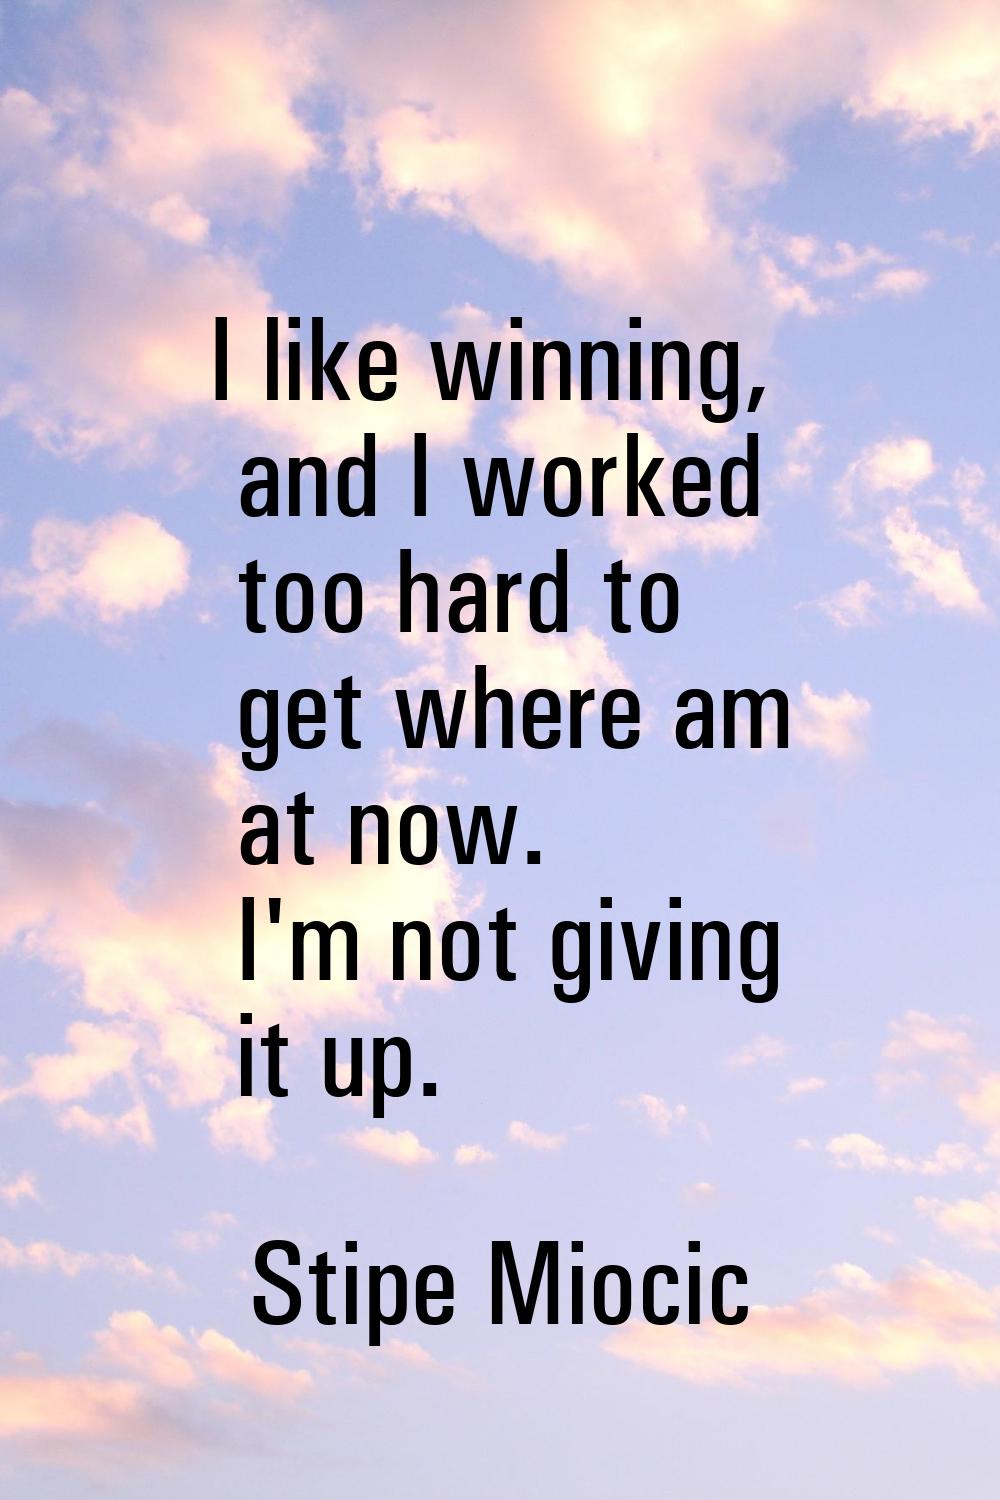 I like winning, and I worked too hard to get where am at now. I'm not giving it up.